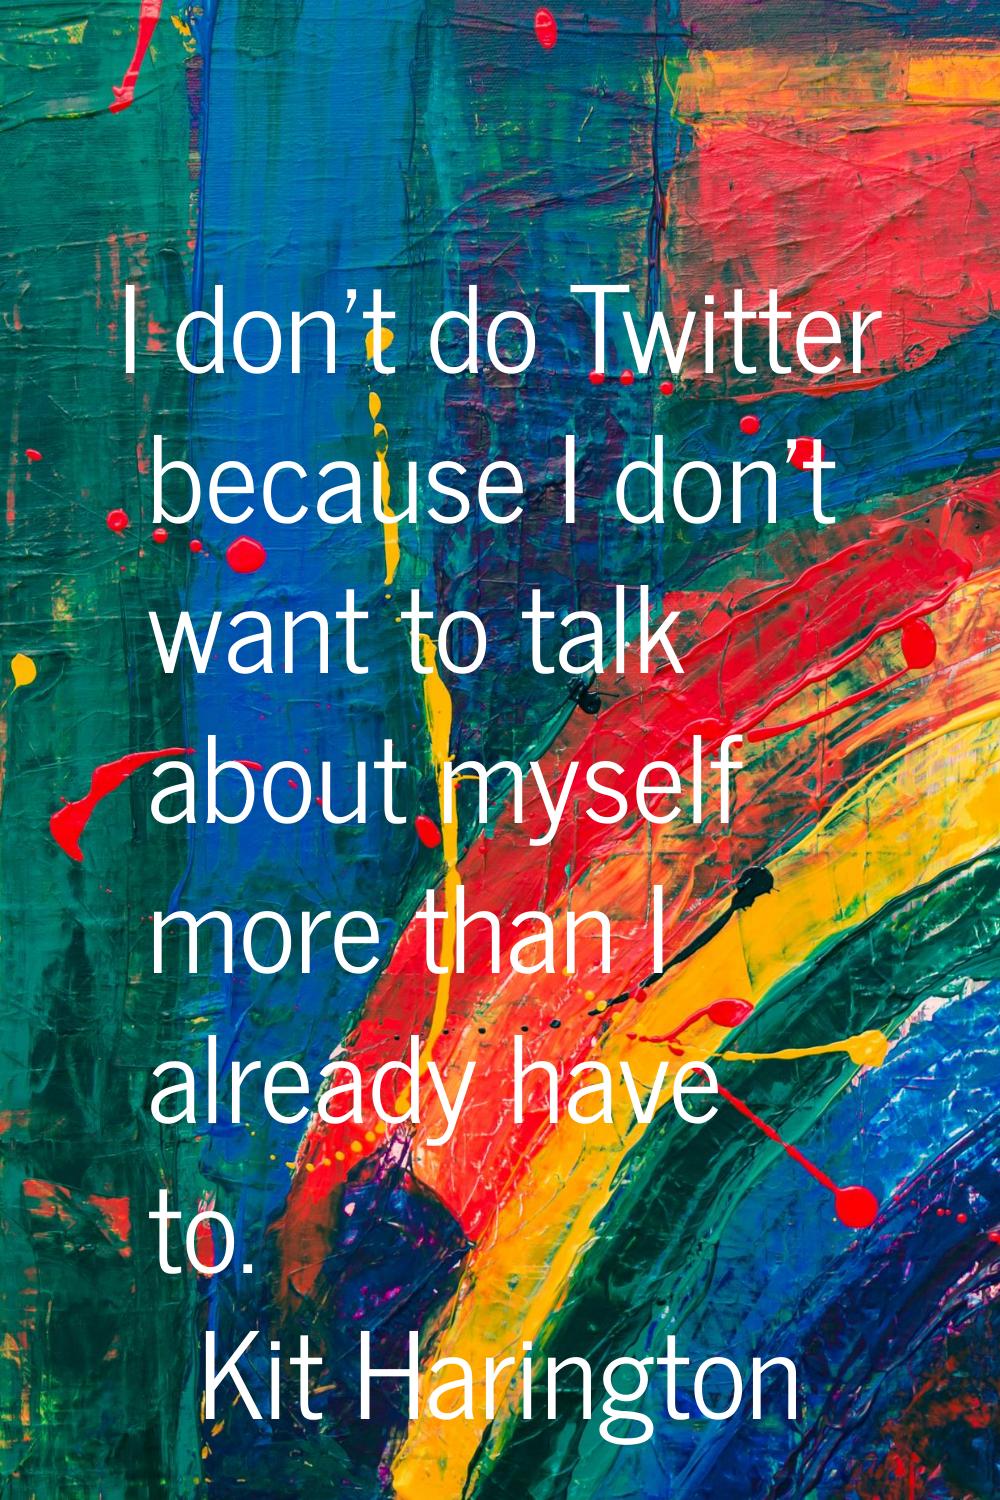 I don't do Twitter because I don't want to talk about myself more than I already have to.